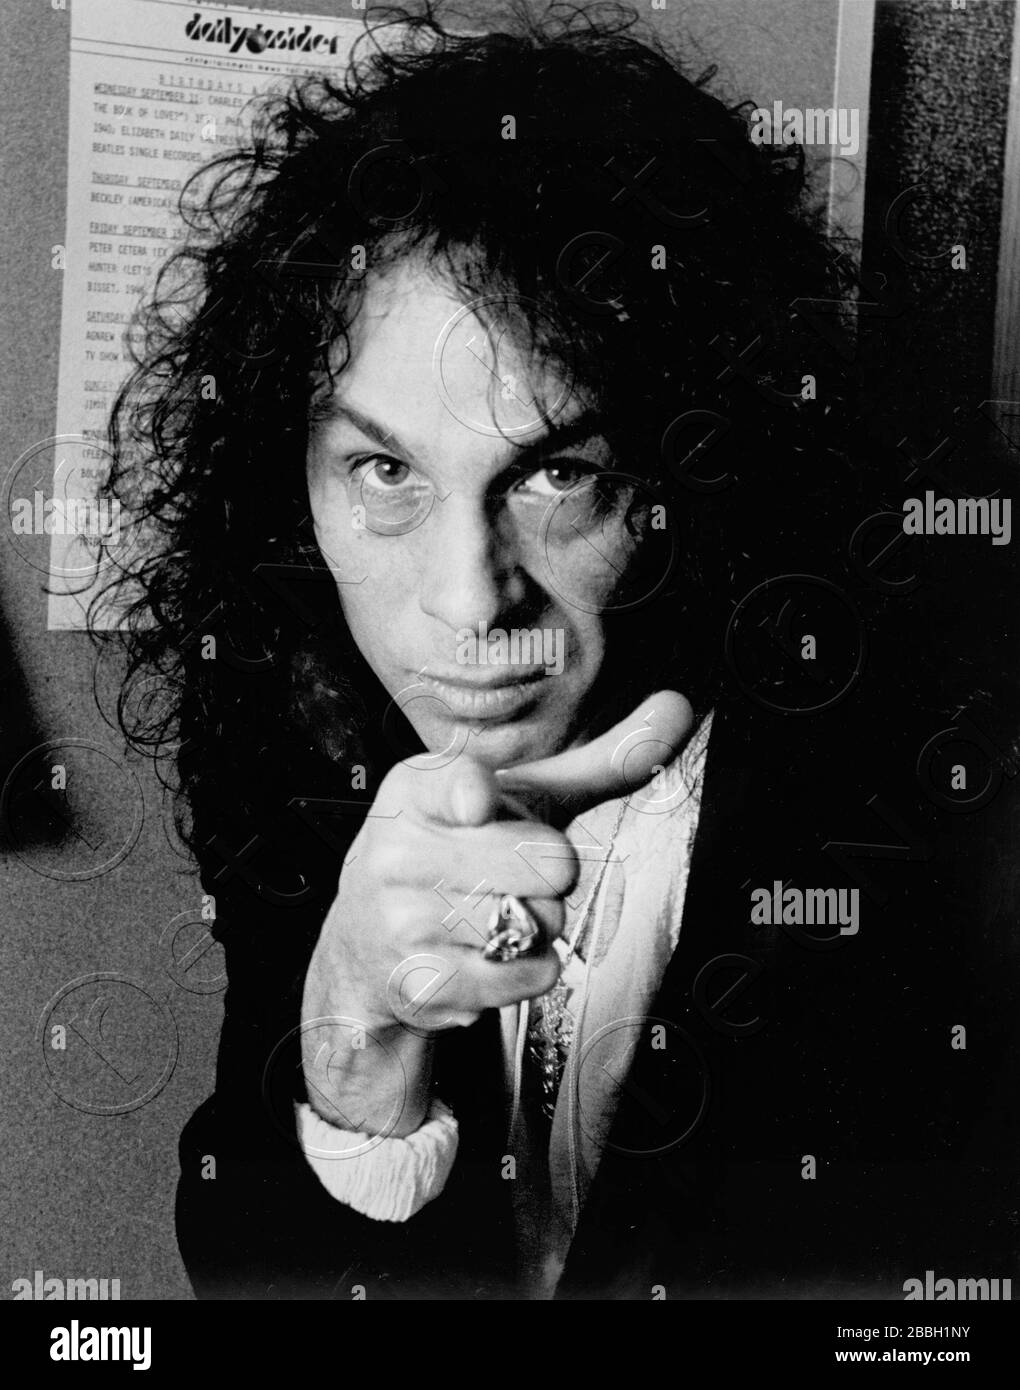 Ronnie James Dio (July 10, 1942 Ð May 16, 2010) was an American heavy metal vocalist and songwriter. He performed with Elf, Rainbow, Black Sabbath, Heaven & Hell, and his own band Dio. Credit: Scott Weiner / MediaPunch Stock Photo